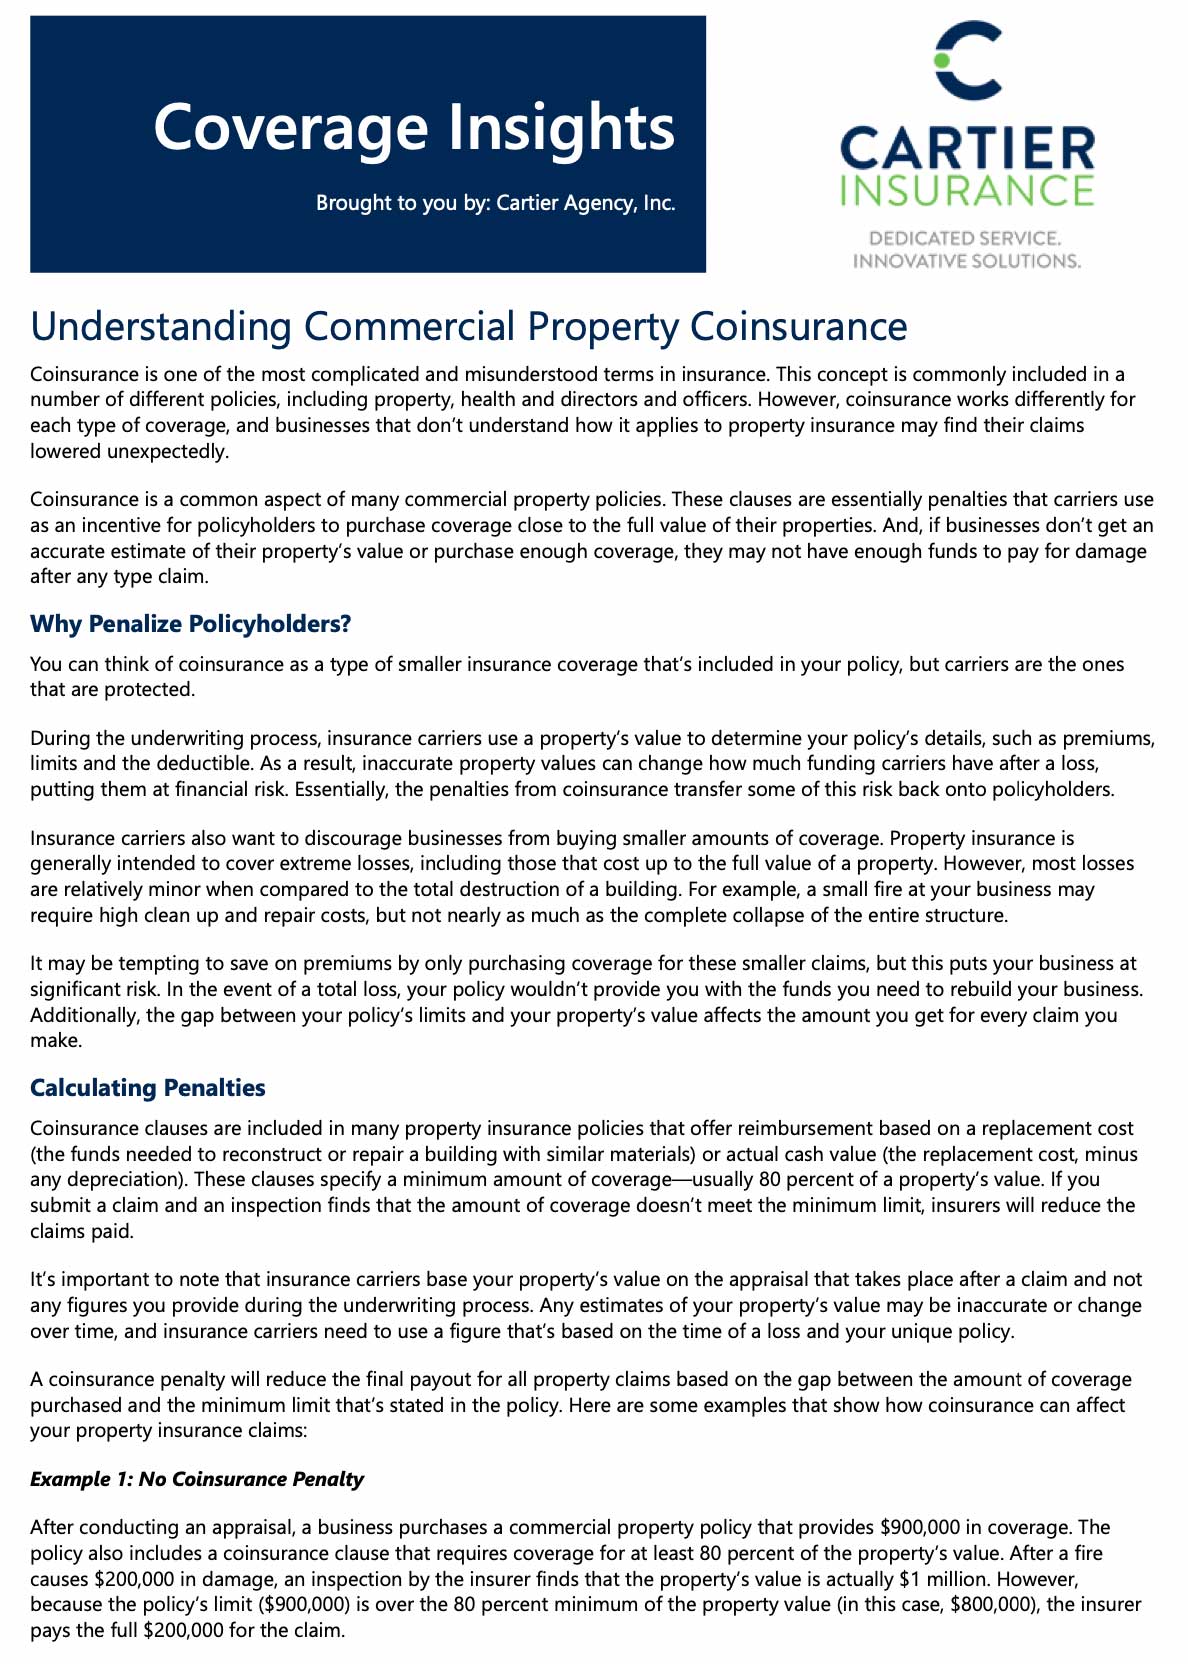 Commercial Property Insights